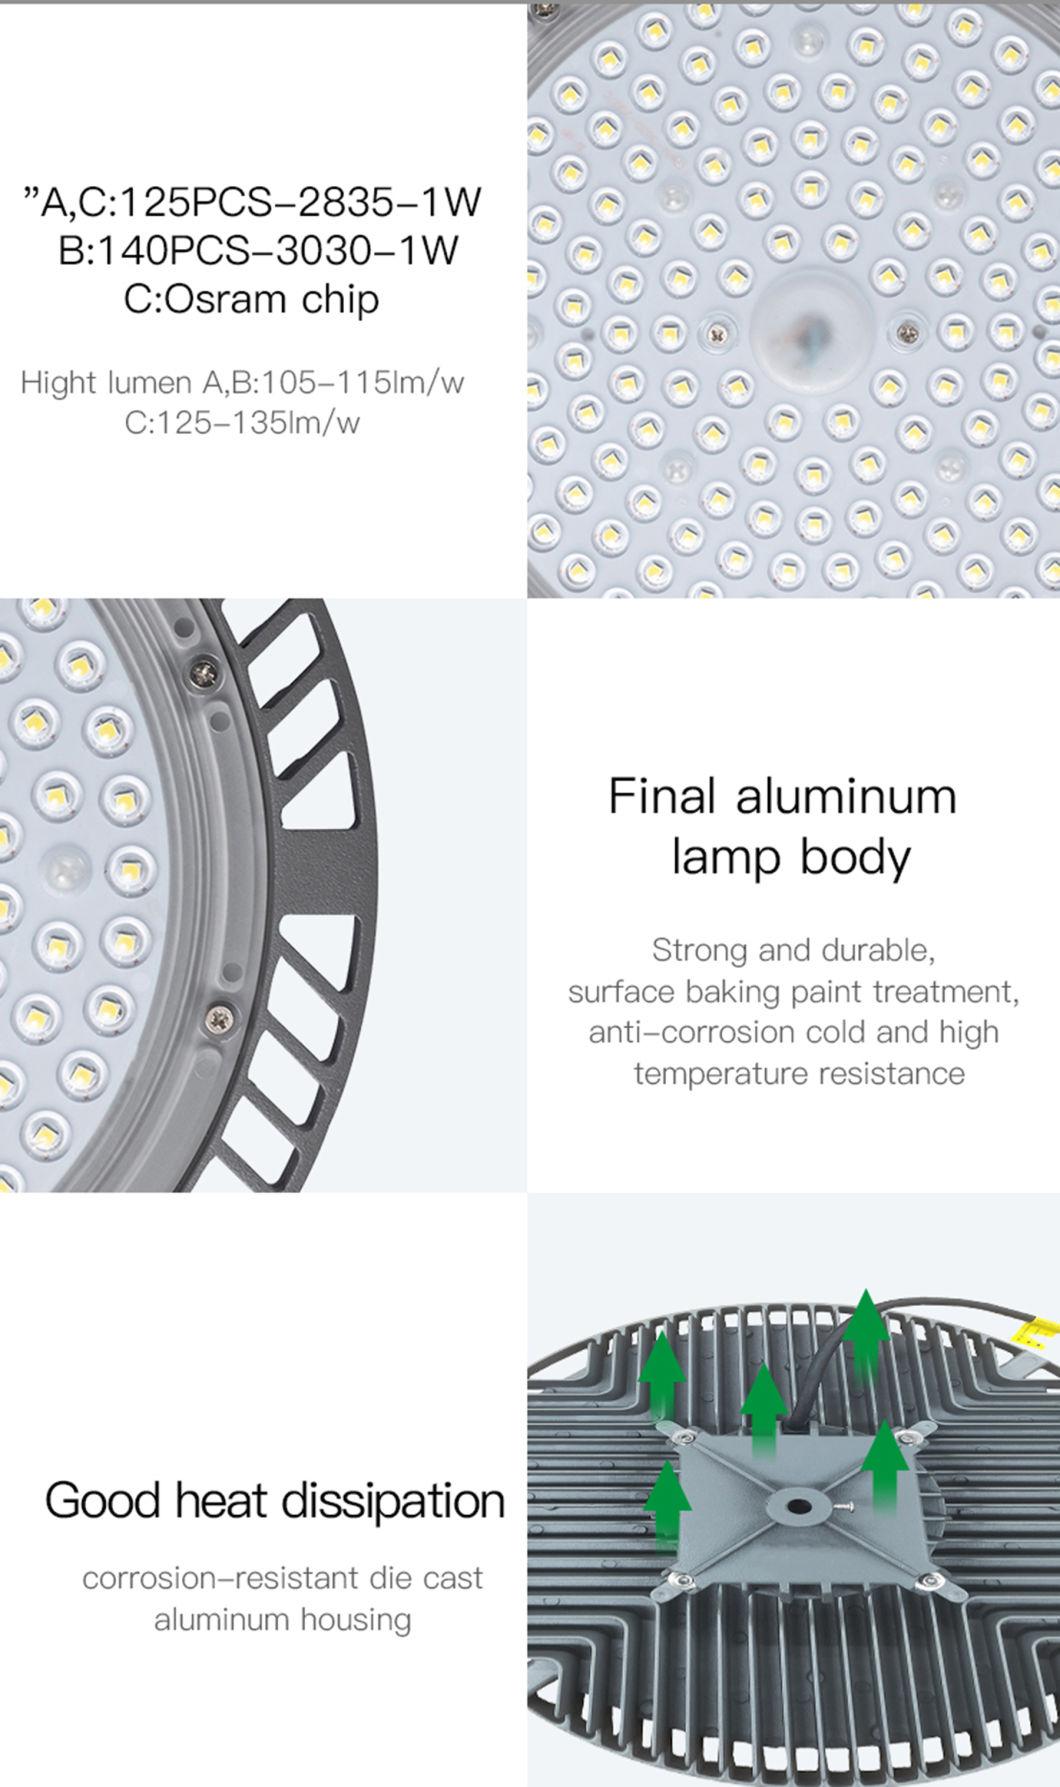 Factory Warehouse Industrial Luminaire Cost-Effective High Efficiency UFO High Brightness LED Highbay Light